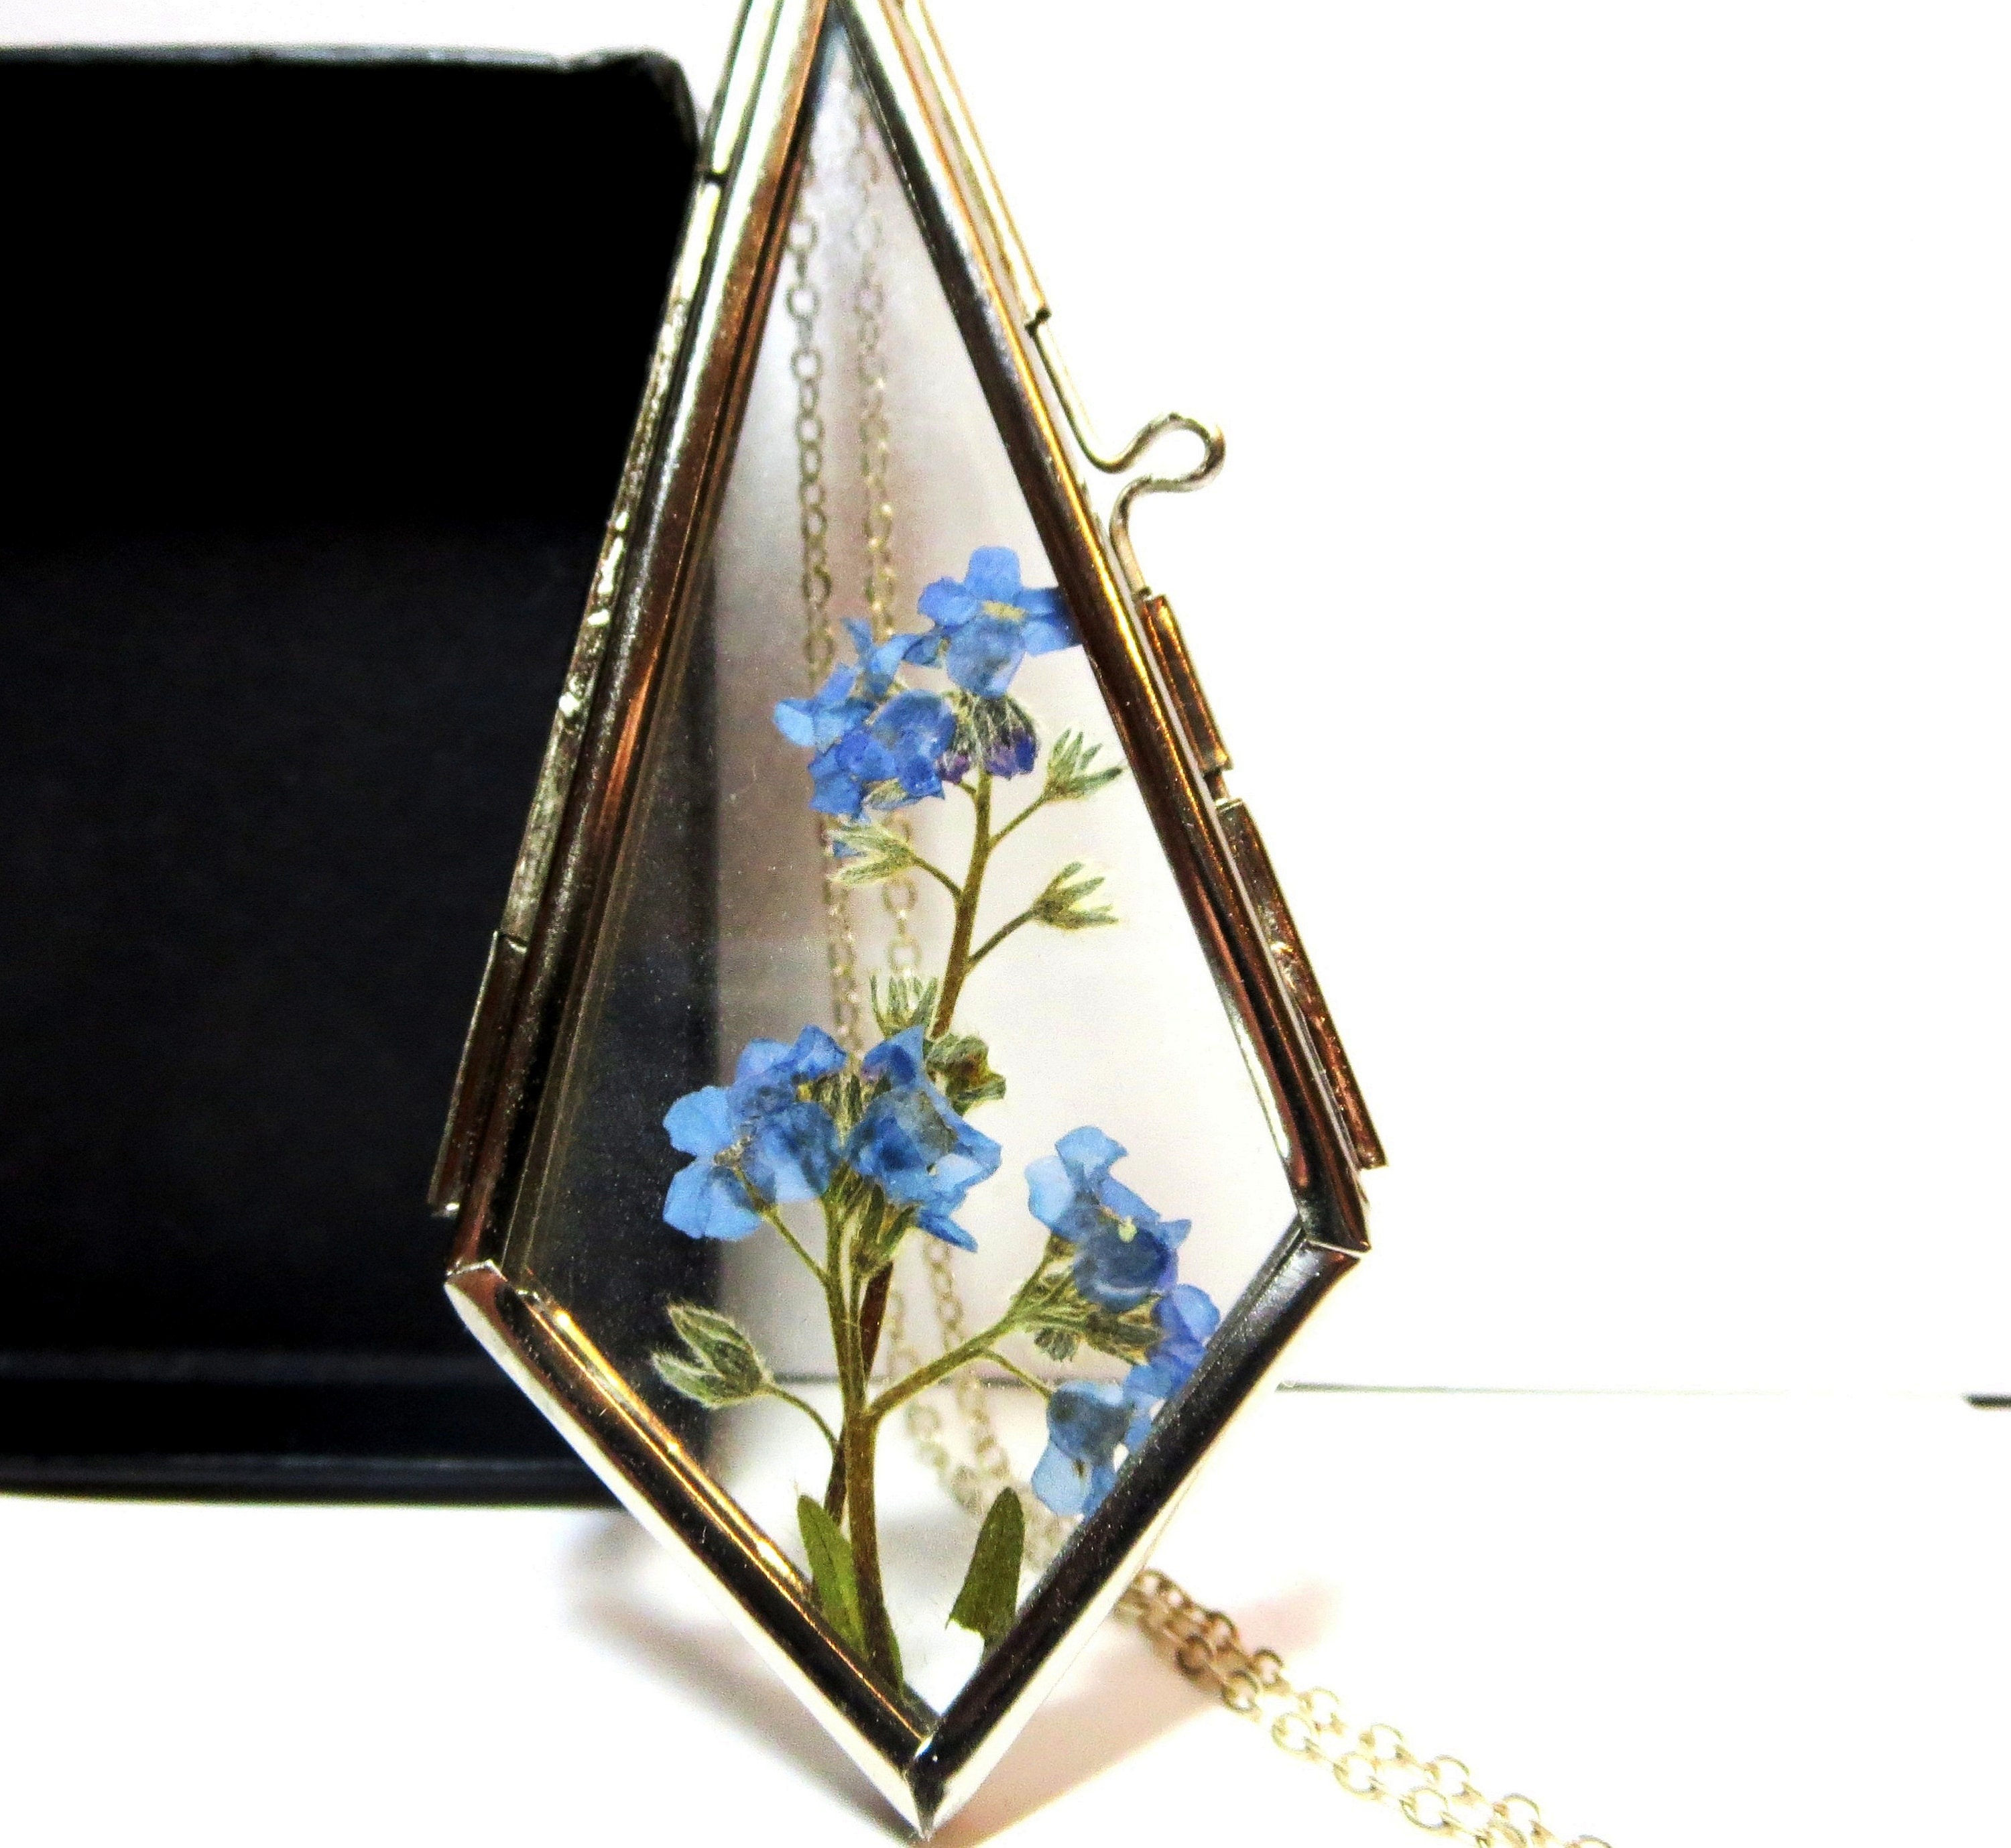 Forget Me Not Pressed Flowers Art Marigold Dried Flowers Art 